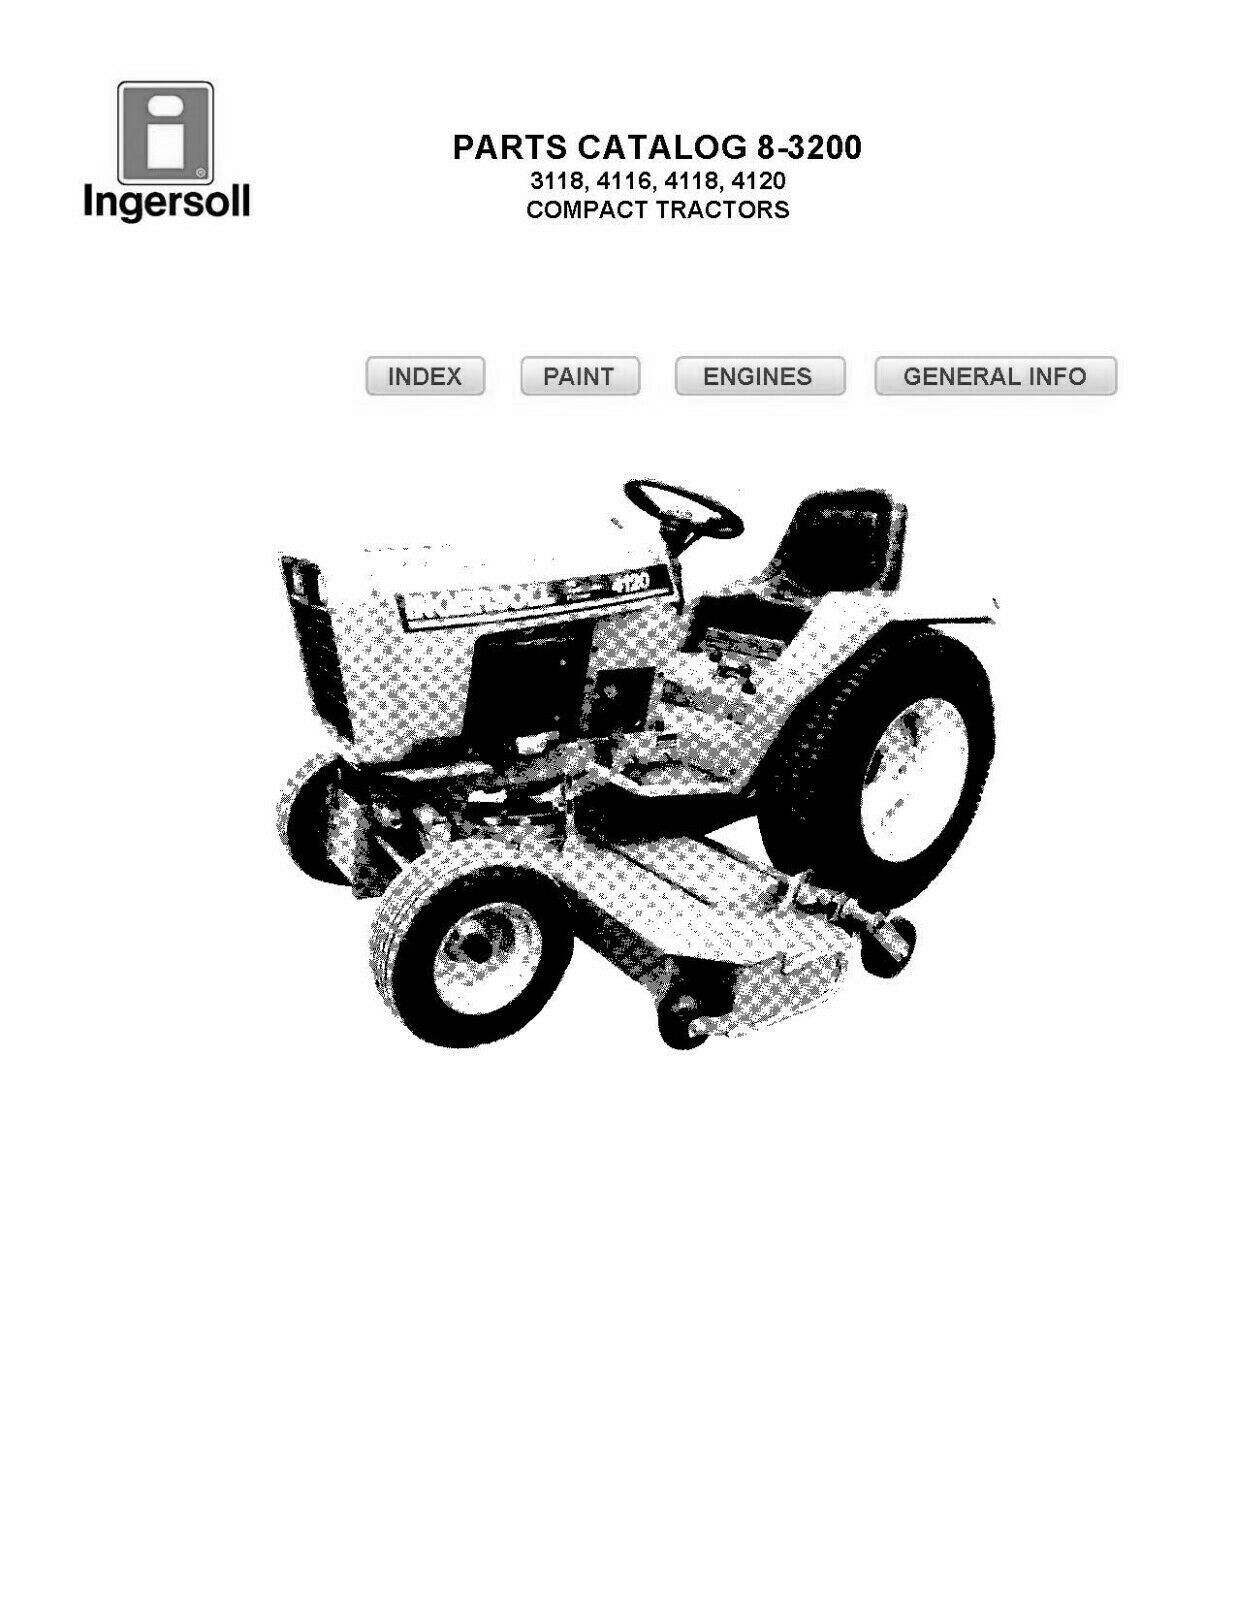 TRACTORS Service Parts Manual Fits Ingersoll COMPACT LAWN 3118 4116 4118 4120